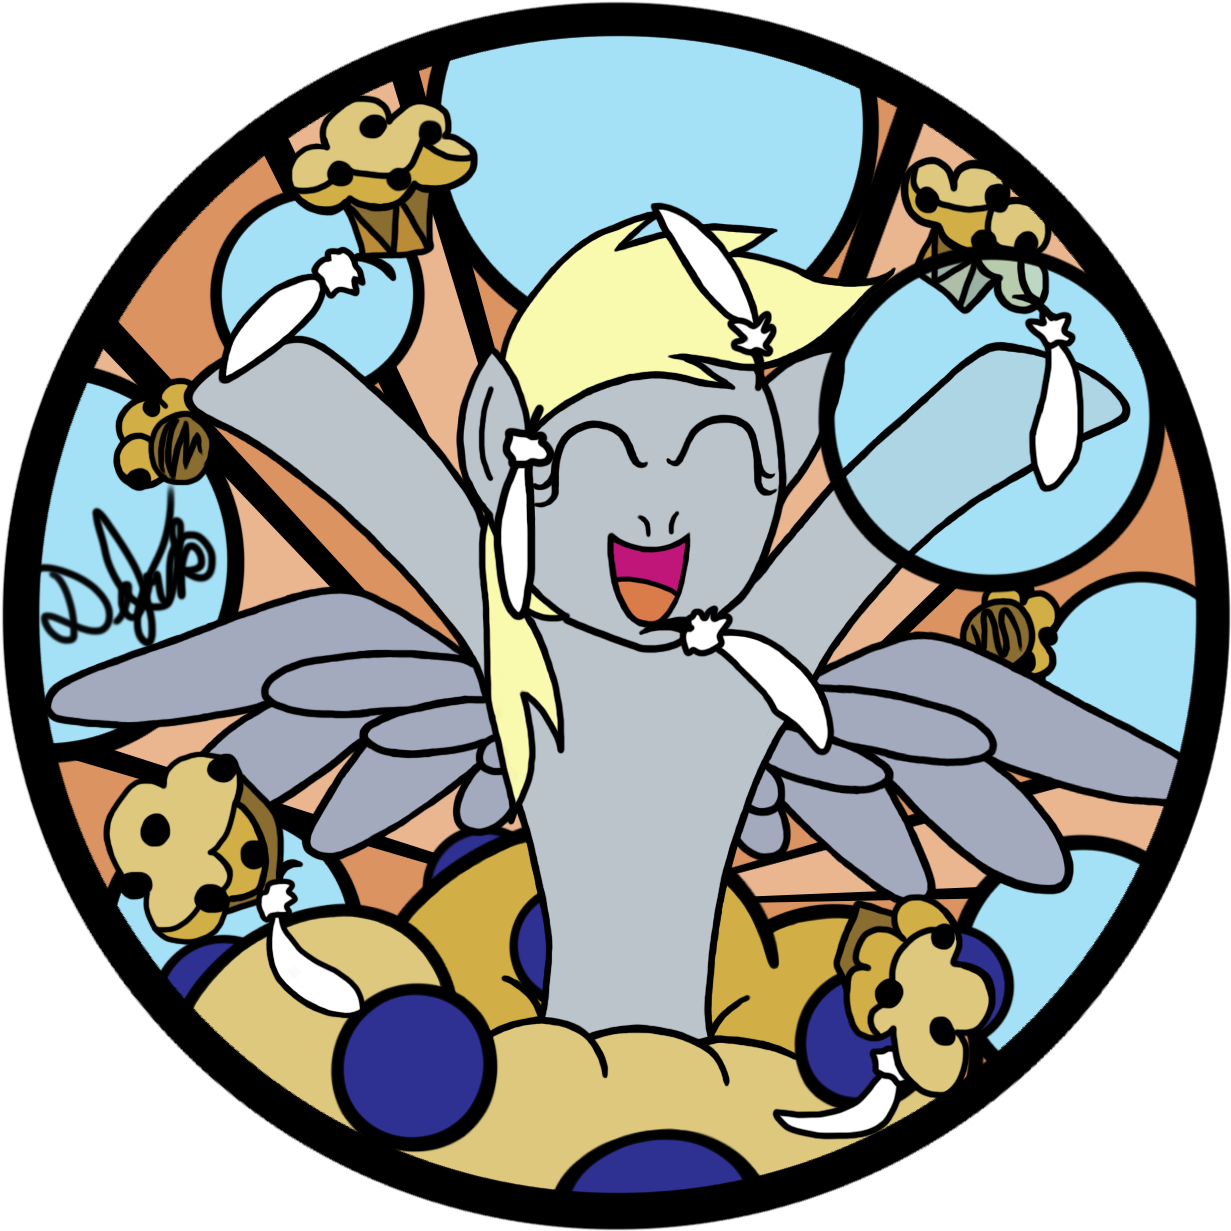 Derpy Hooves Design For Stained Glass By Devictemple - Stained Glass (2076x1356)